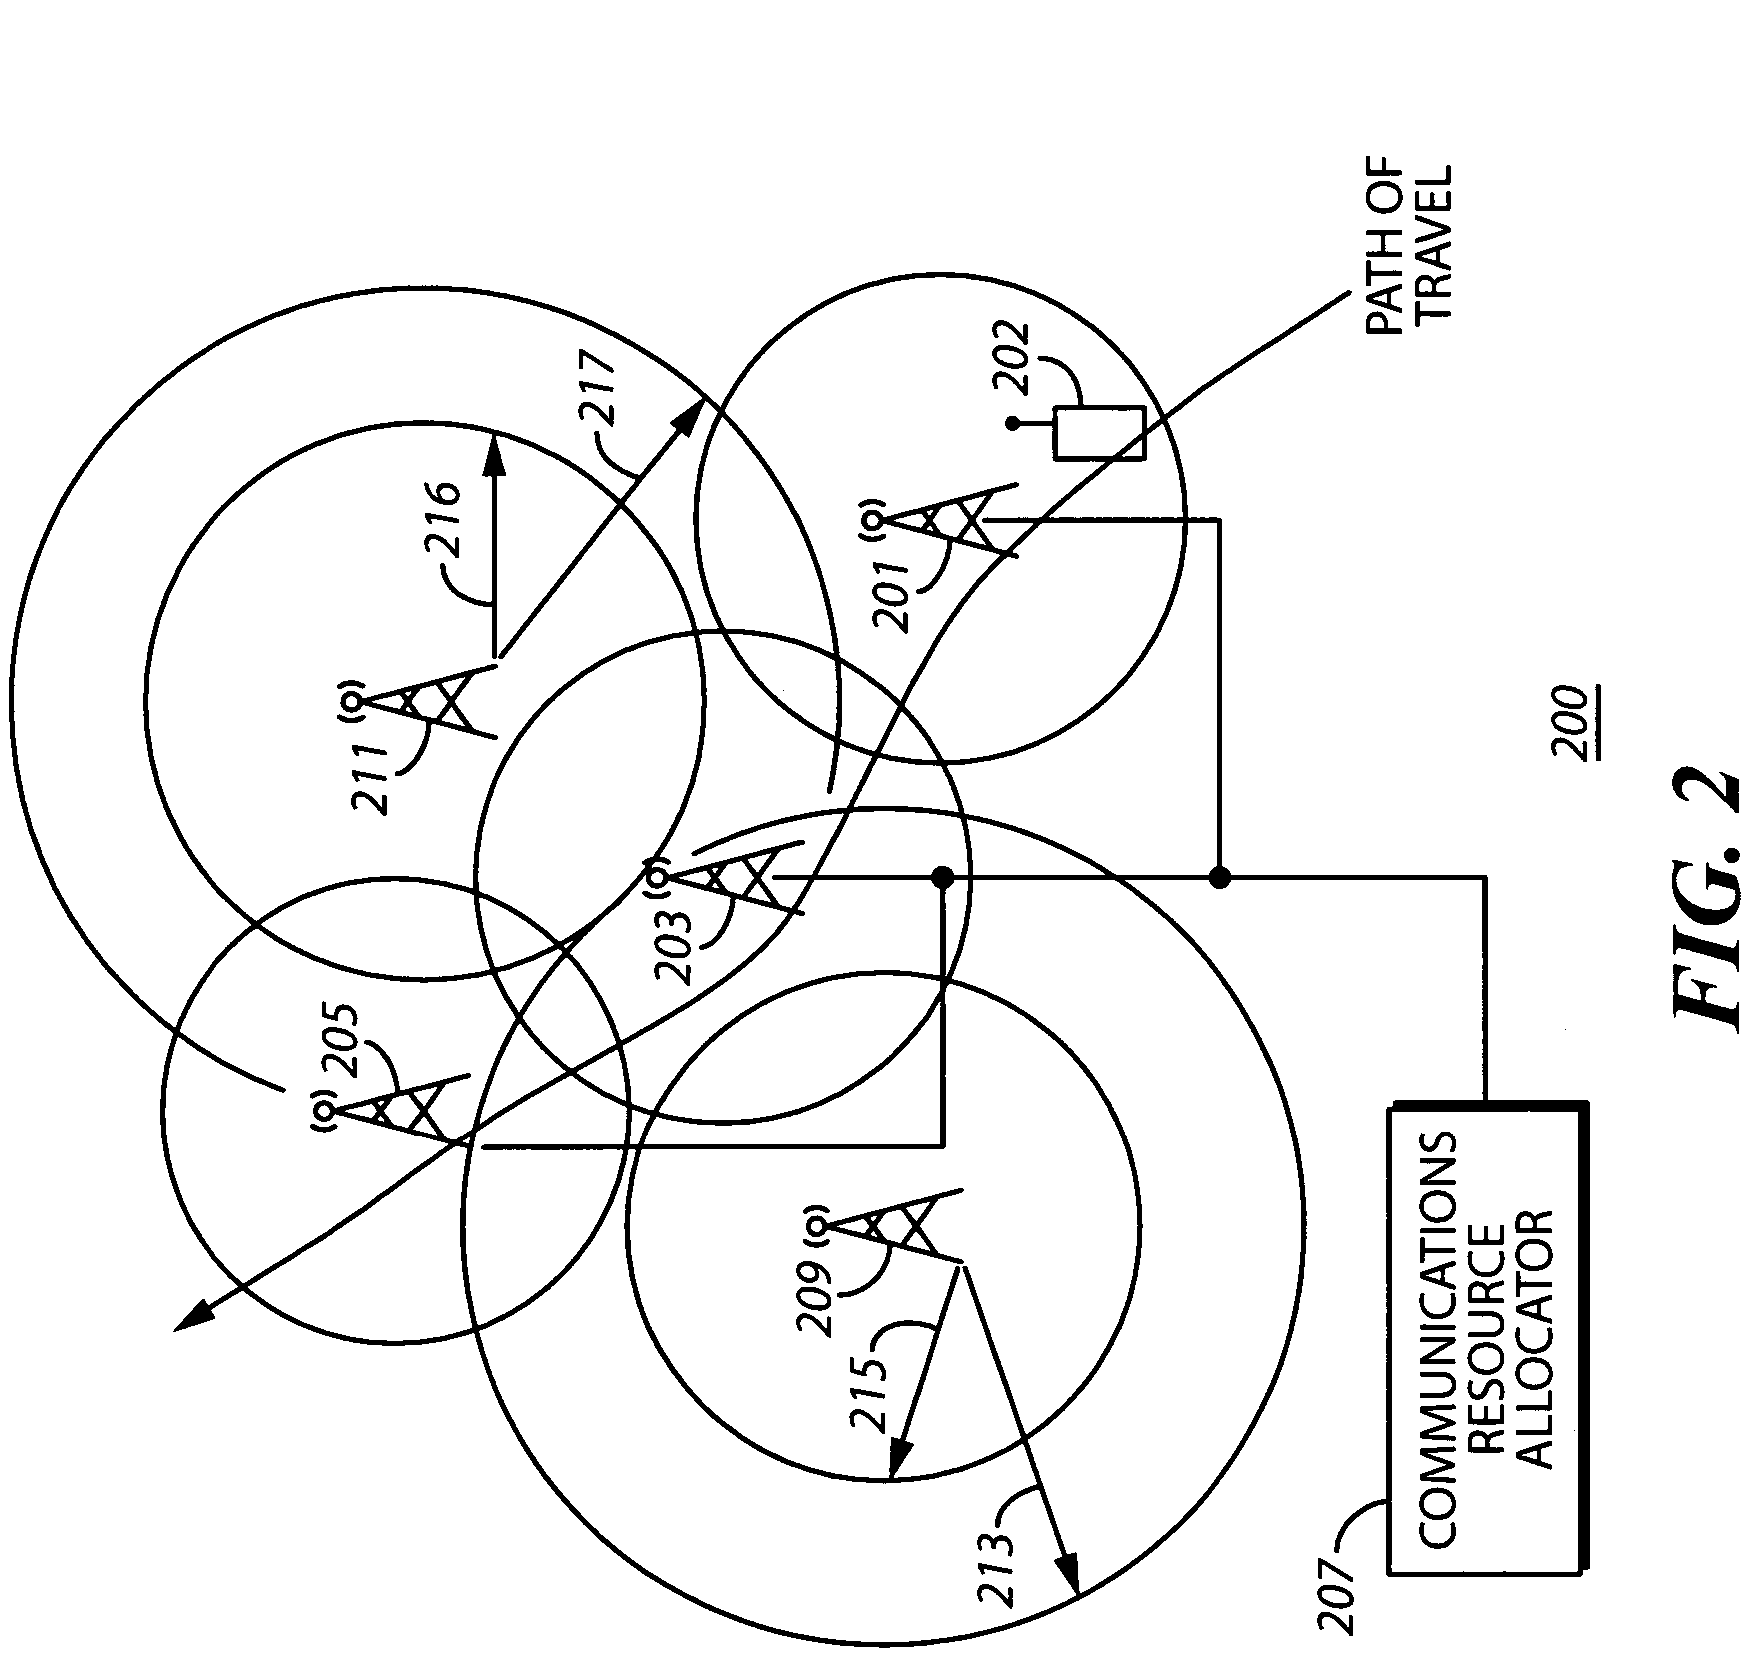 Method for mitigating intermodulation interference using channel power estimation and attenuation in a two-way radio communications system